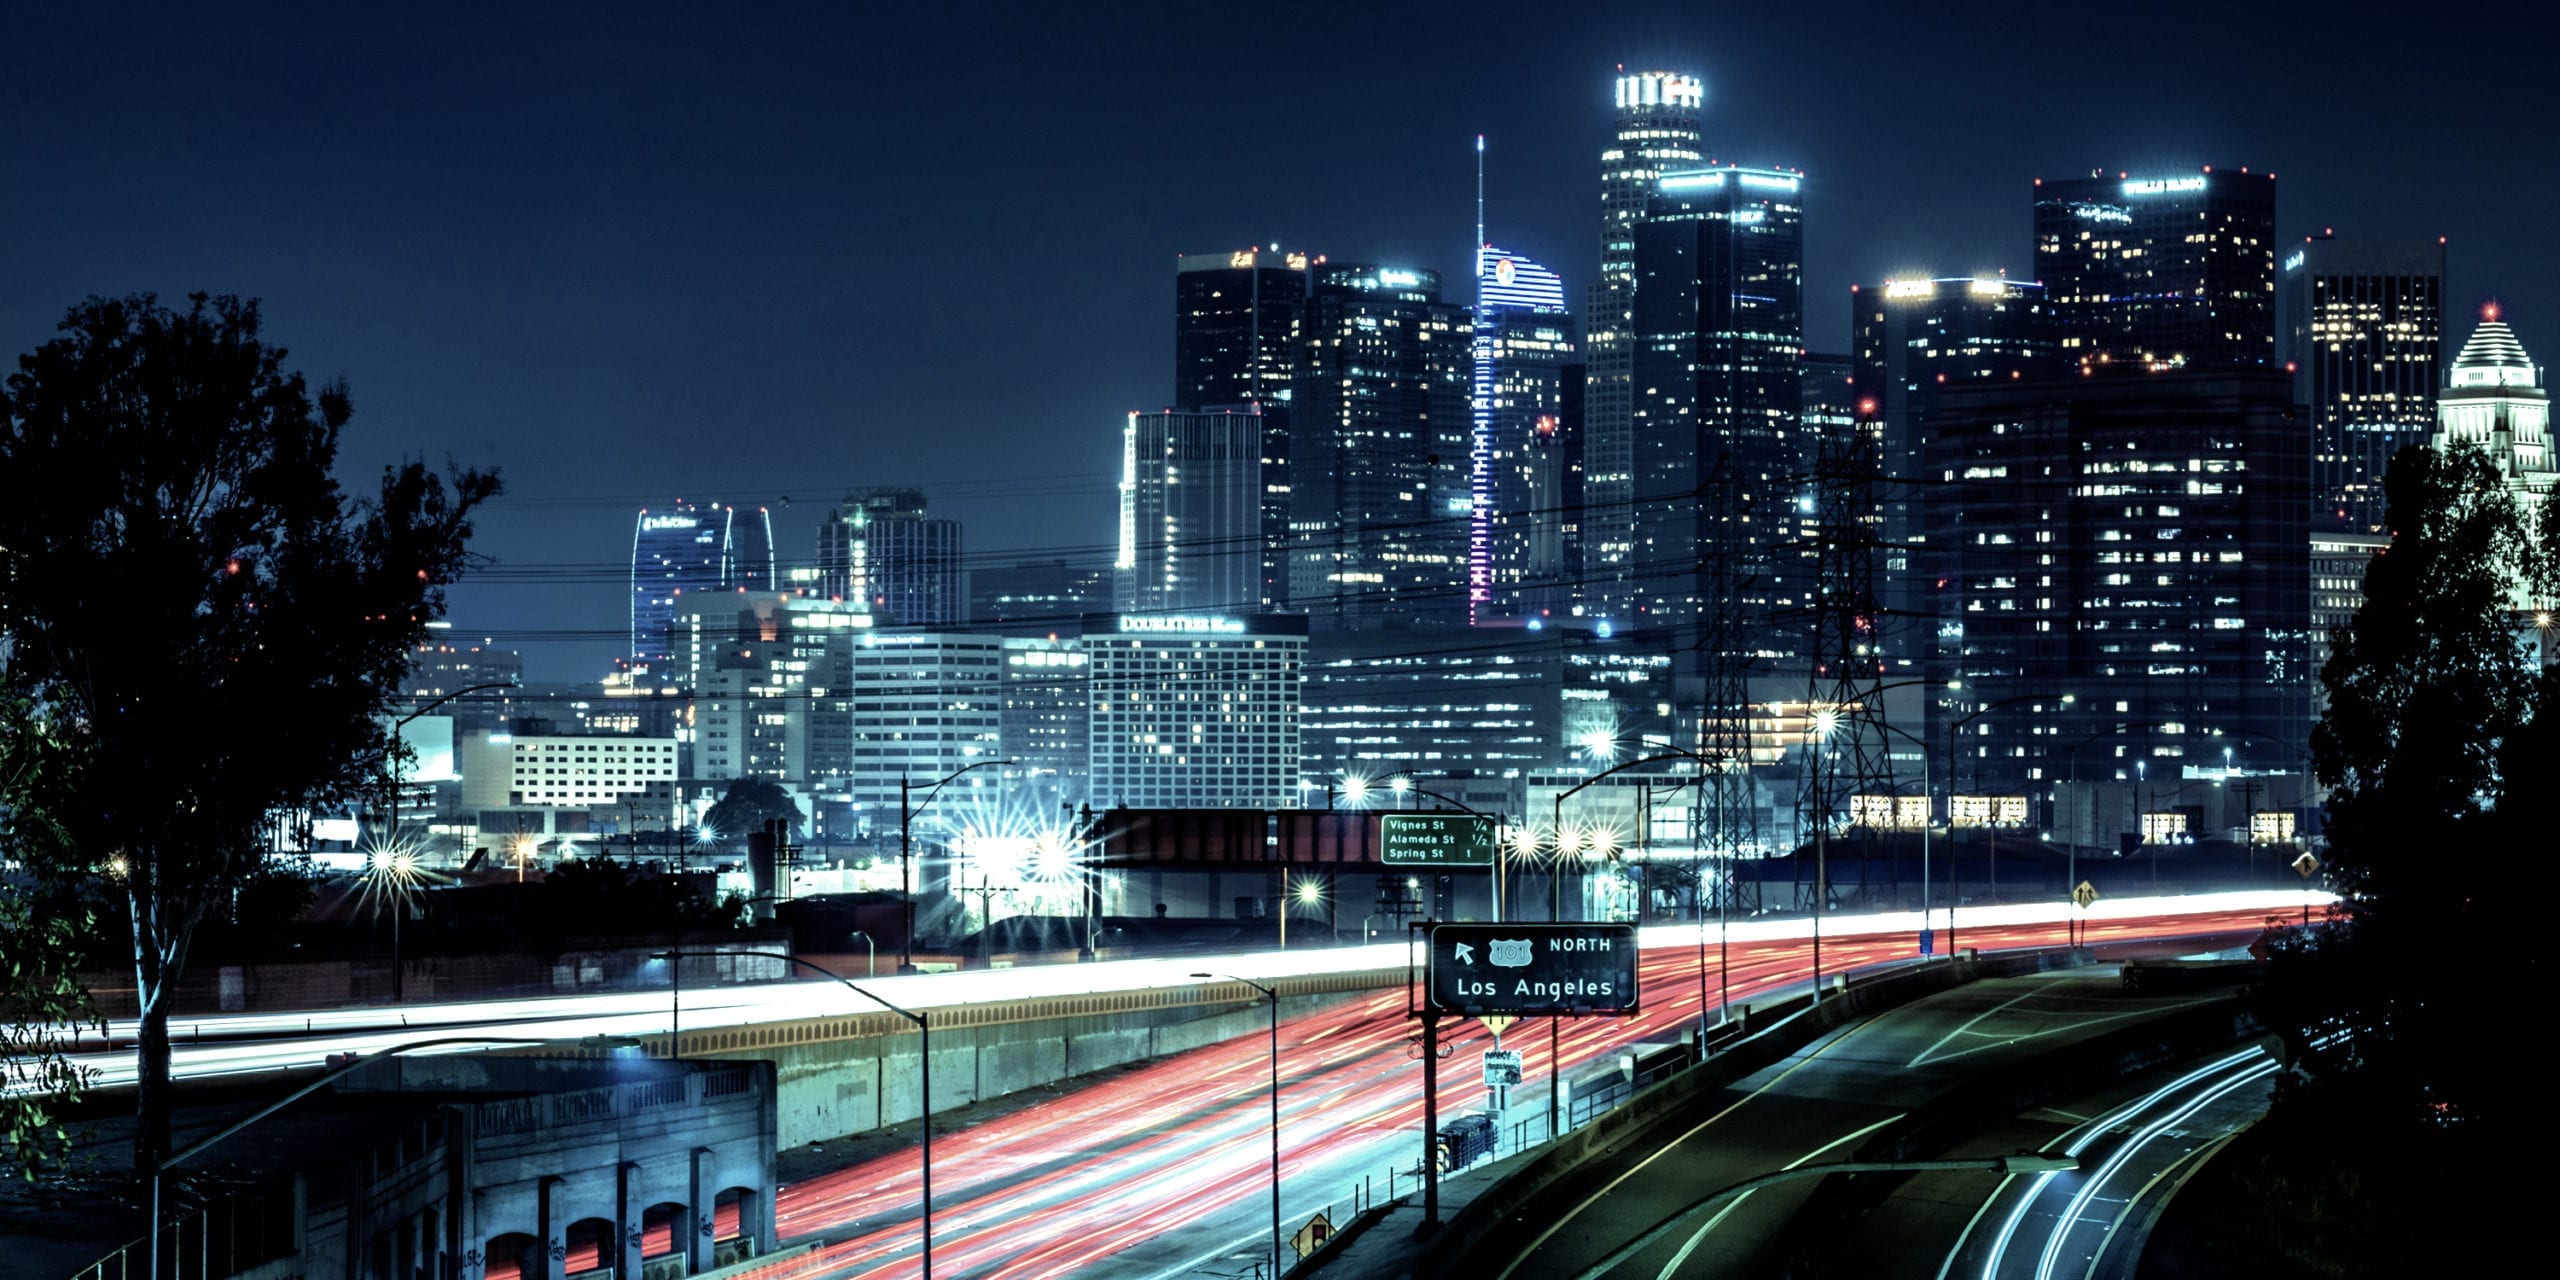 Los Angeles skyline at night. Photo by Flickr user Colin Durfee.